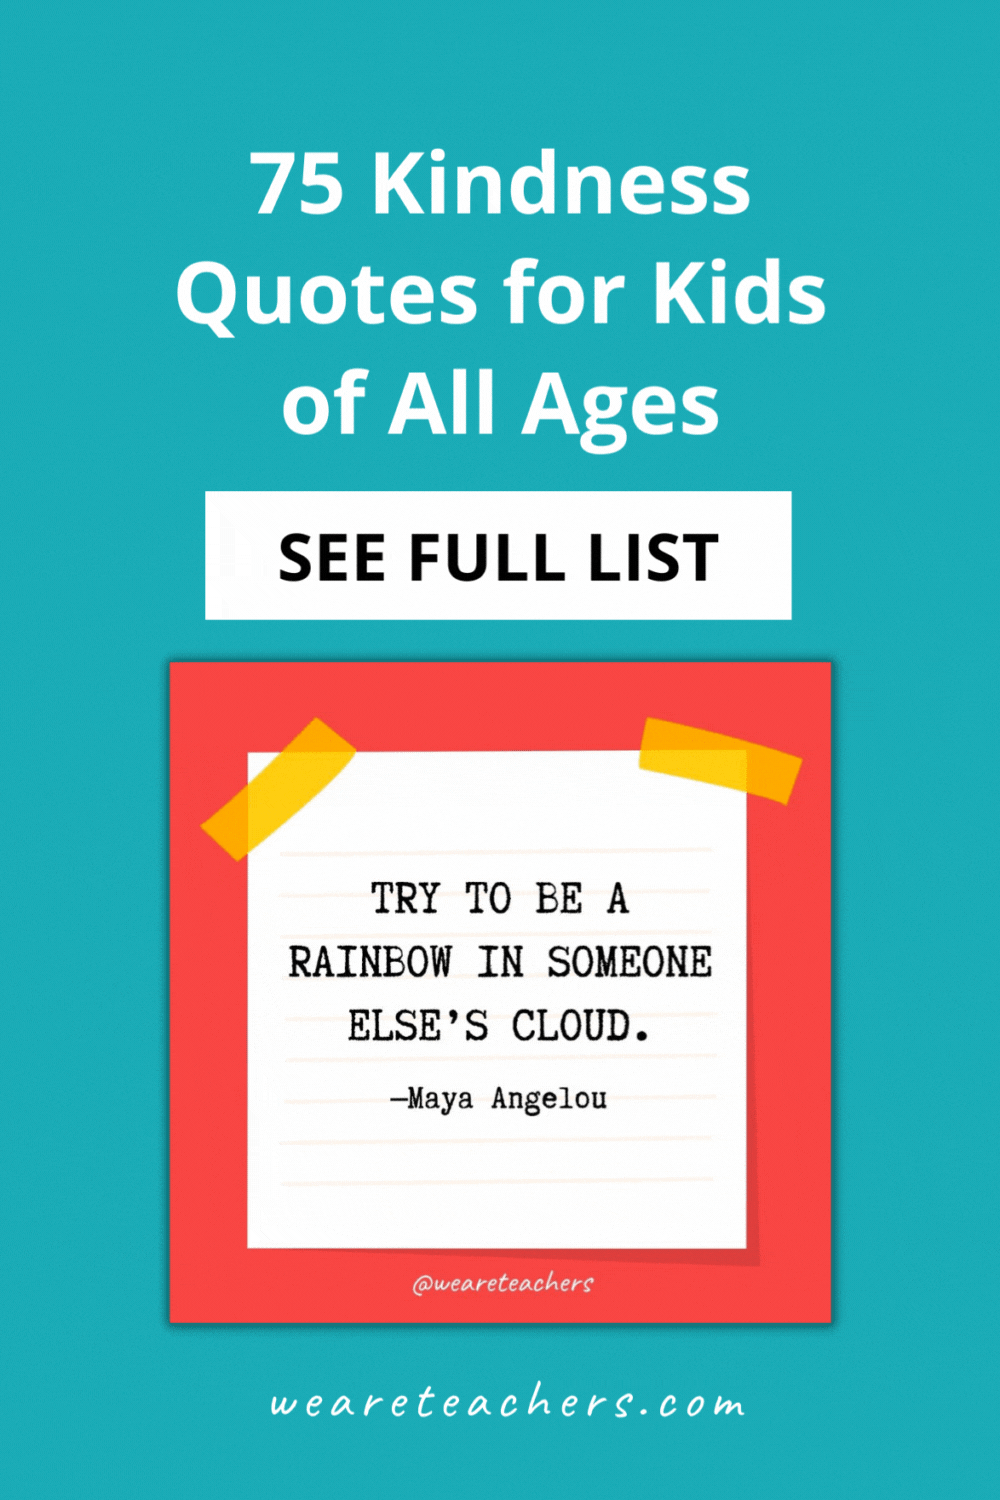 The world could use a little more kindness and empathy, which is why we've put together these kindness quotes for kids.